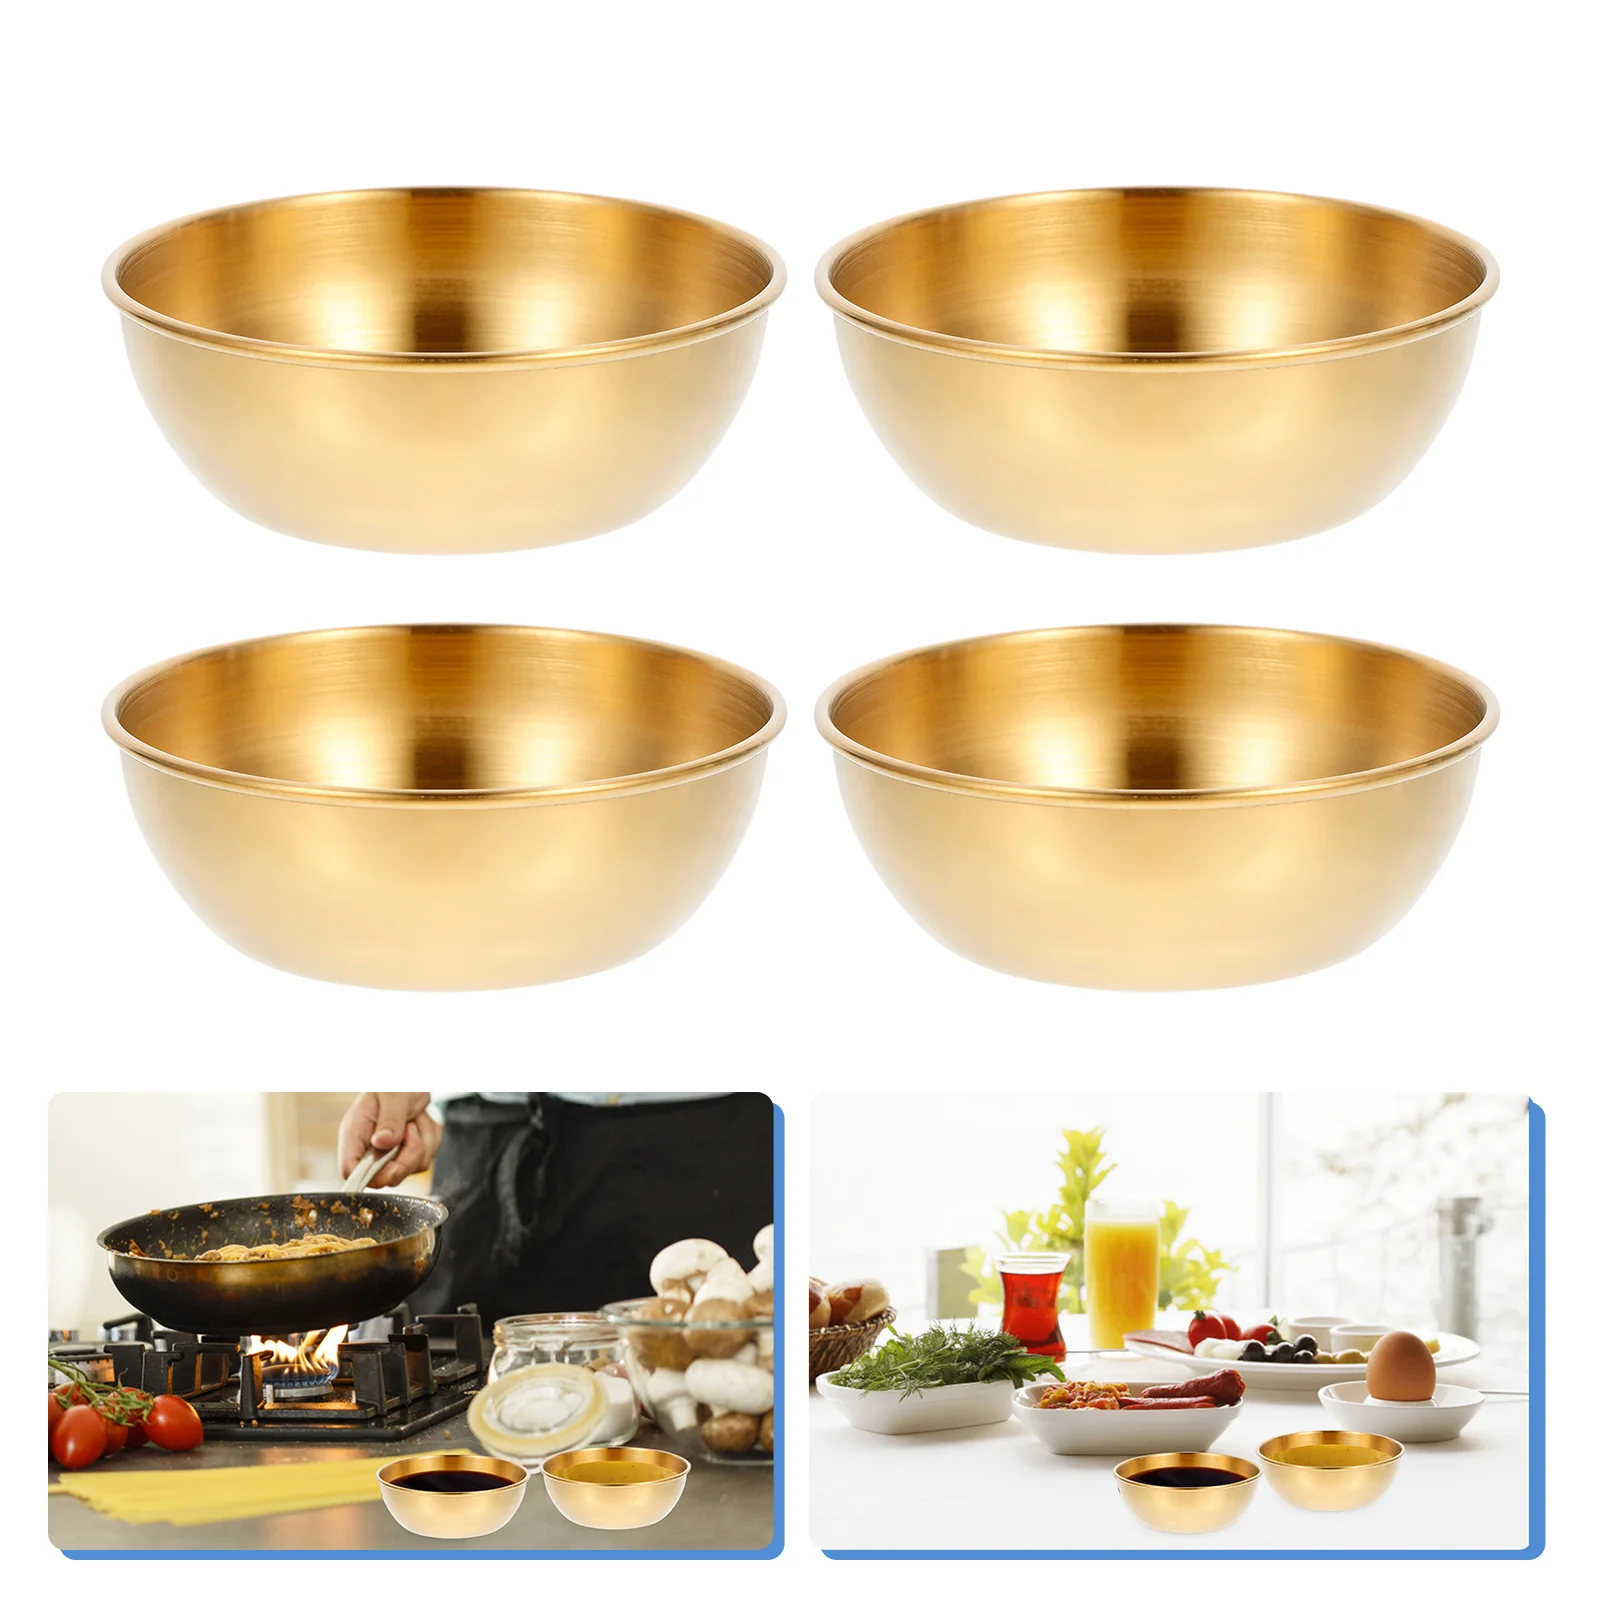 

4 Pcs Seasoning Dish Soup Bowls Lids Bowls Mold Saucers Bowl Stainless Steel Round Sauce Dishes Mini Dip Bowls Child